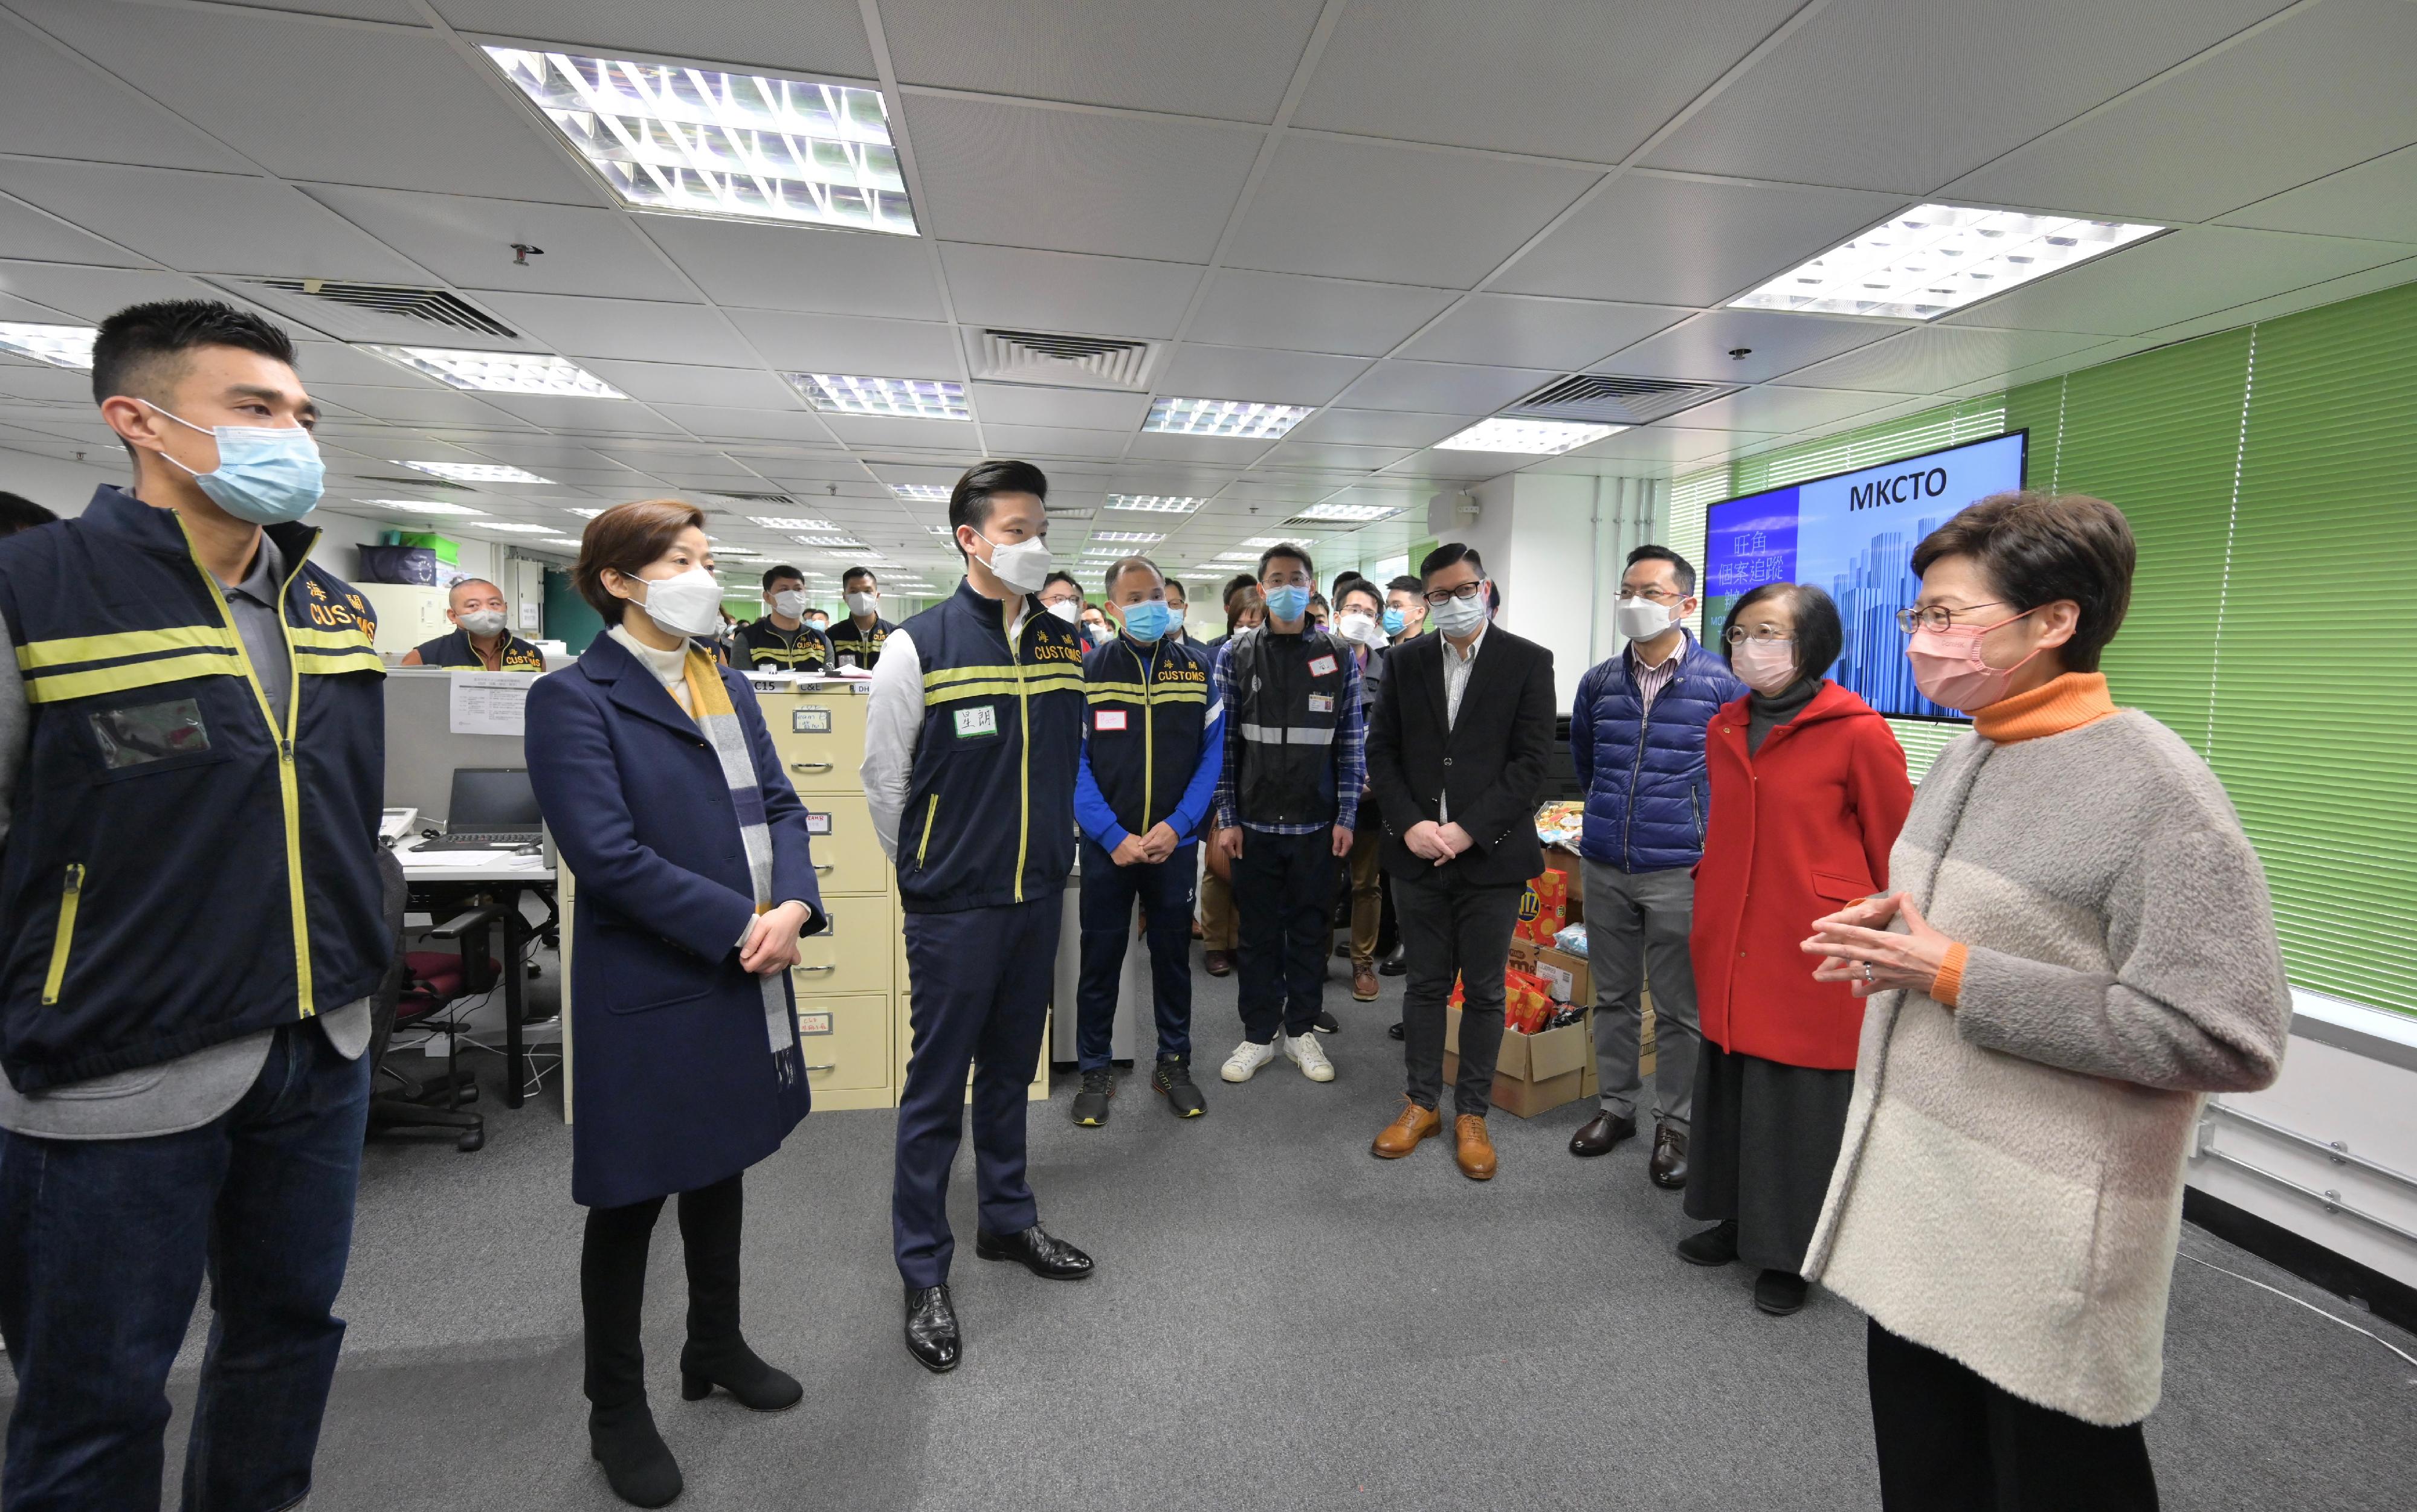 The Chief Executive, Mrs Carrie Lam, visited the Contact Tracing Offices in Kai Tak and Mong Kok today (February 1). Photo shows Mrs Lam (first right) chatting with the Commissioner of Customs and Excise, Ms Louise Ho (second left), and customs officers at the Contact Tracing Office in Mong Kok. Looking on are the Secretary for Food and Health, Professor Sophia Chan (second right); the Secretary for Security, Mr Tang Ping-keung (fourth right); and the Director of Health, Dr Ronald Lam (third right).